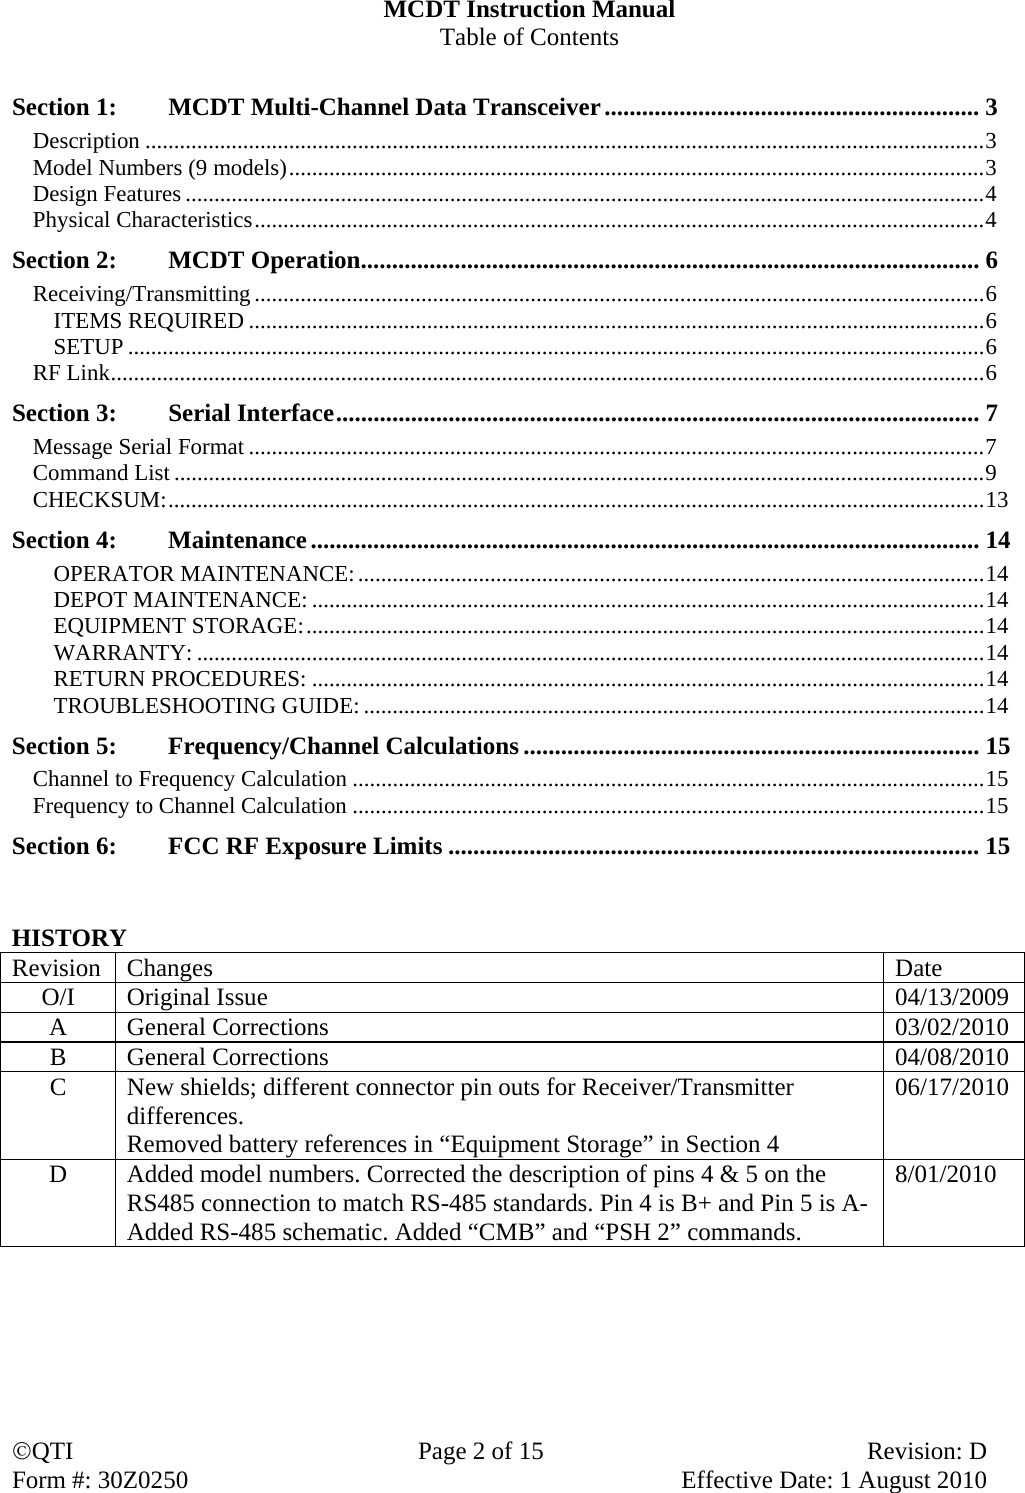 QTI  Page 2 of 15  Revision: D Form #: 30Z0250    Effective Date: 1 August 2010 MCDT Instruction Manual Table of Contents  Section 1:  MCDT Multi-Channel Data Transceiver ............................................................ 3 Description .................................................................................................................................................. 3 Model Numbers (9 models) ......................................................................................................................... 3 Design Features ........................................................................................................................................... 4 Physical Characteristics ............................................................................................................................... 4 Section 2:  MCDT Operation ................................................................................................... 6 Receiving/Transmitting ............................................................................................................................... 6 ITEMS REQUIRED ................................................................................................................................ 6 SETUP ..................................................................................................................................................... 6 RF Link ........................................................................................................................................................ 6 Section 3:  Serial Interface ....................................................................................................... 7 Message Serial Format ................................................................................................................................ 7 Command List ............................................................................................................................................. 9 CHECKSUM: .............................................................................................................................................. 13 Section 4:  Maintenance ........................................................................................................... 14 OPERATOR MAINTENANCE: ............................................................................................................. 14 DEPOT MAINTENANCE: ..................................................................................................................... 14 EQUIPMENT STORAGE: ...................................................................................................................... 14 WARRANTY: ......................................................................................................................................... 14 RETURN PROCEDURES: ..................................................................................................................... 14 TROUBLESHOOTING GUIDE: ............................................................................................................ 14 Section 5:  Frequency/Channel Calculations ......................................................................... 15 Channel to Frequency Calculation .............................................................................................................. 15 Frequency to Channel Calculation .............................................................................................................. 15 Section 6:    FCC RF Exposure Limits ..................................................................................... 15   HISTORY Revision Changes  Date O/I  Original Issue   04/13/2009 A General Corrections  03/02/2010 B General Corrections  04/08/2010 C  New shields; different connector pin outs for Receiver/Transmitter differences. Removed battery references in “Equipment Storage” in Section 4 06/17/2010 D  Added model numbers. Corrected the description of pins 4 &amp; 5 on the RS485 connection to match RS-485 standards. Pin 4 is B+ and Pin 5 is A- Added RS-485 schematic. Added “CMB” and “PSH 2” commands. 8/01/2010 